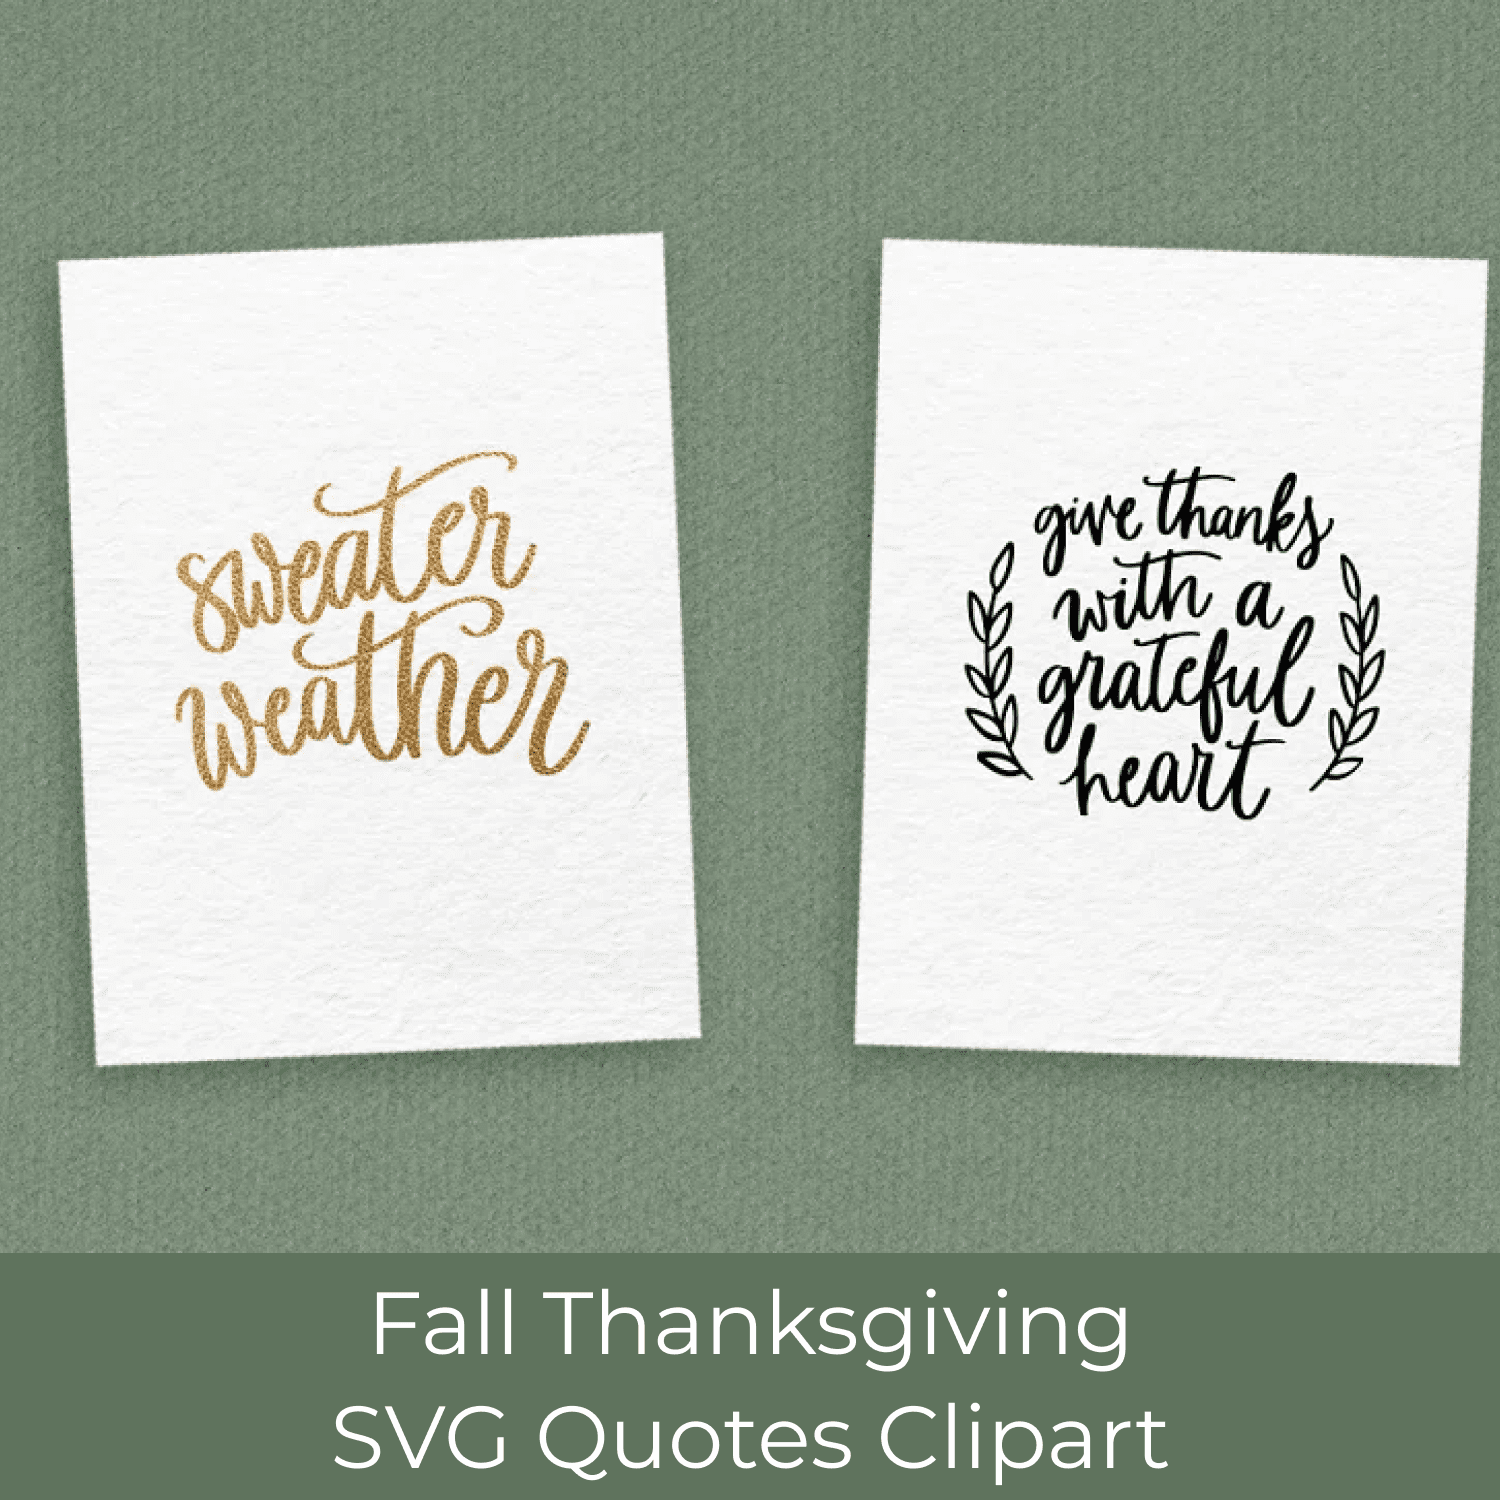 Fall Thanksgiving SVG Quotes Clipart cover.